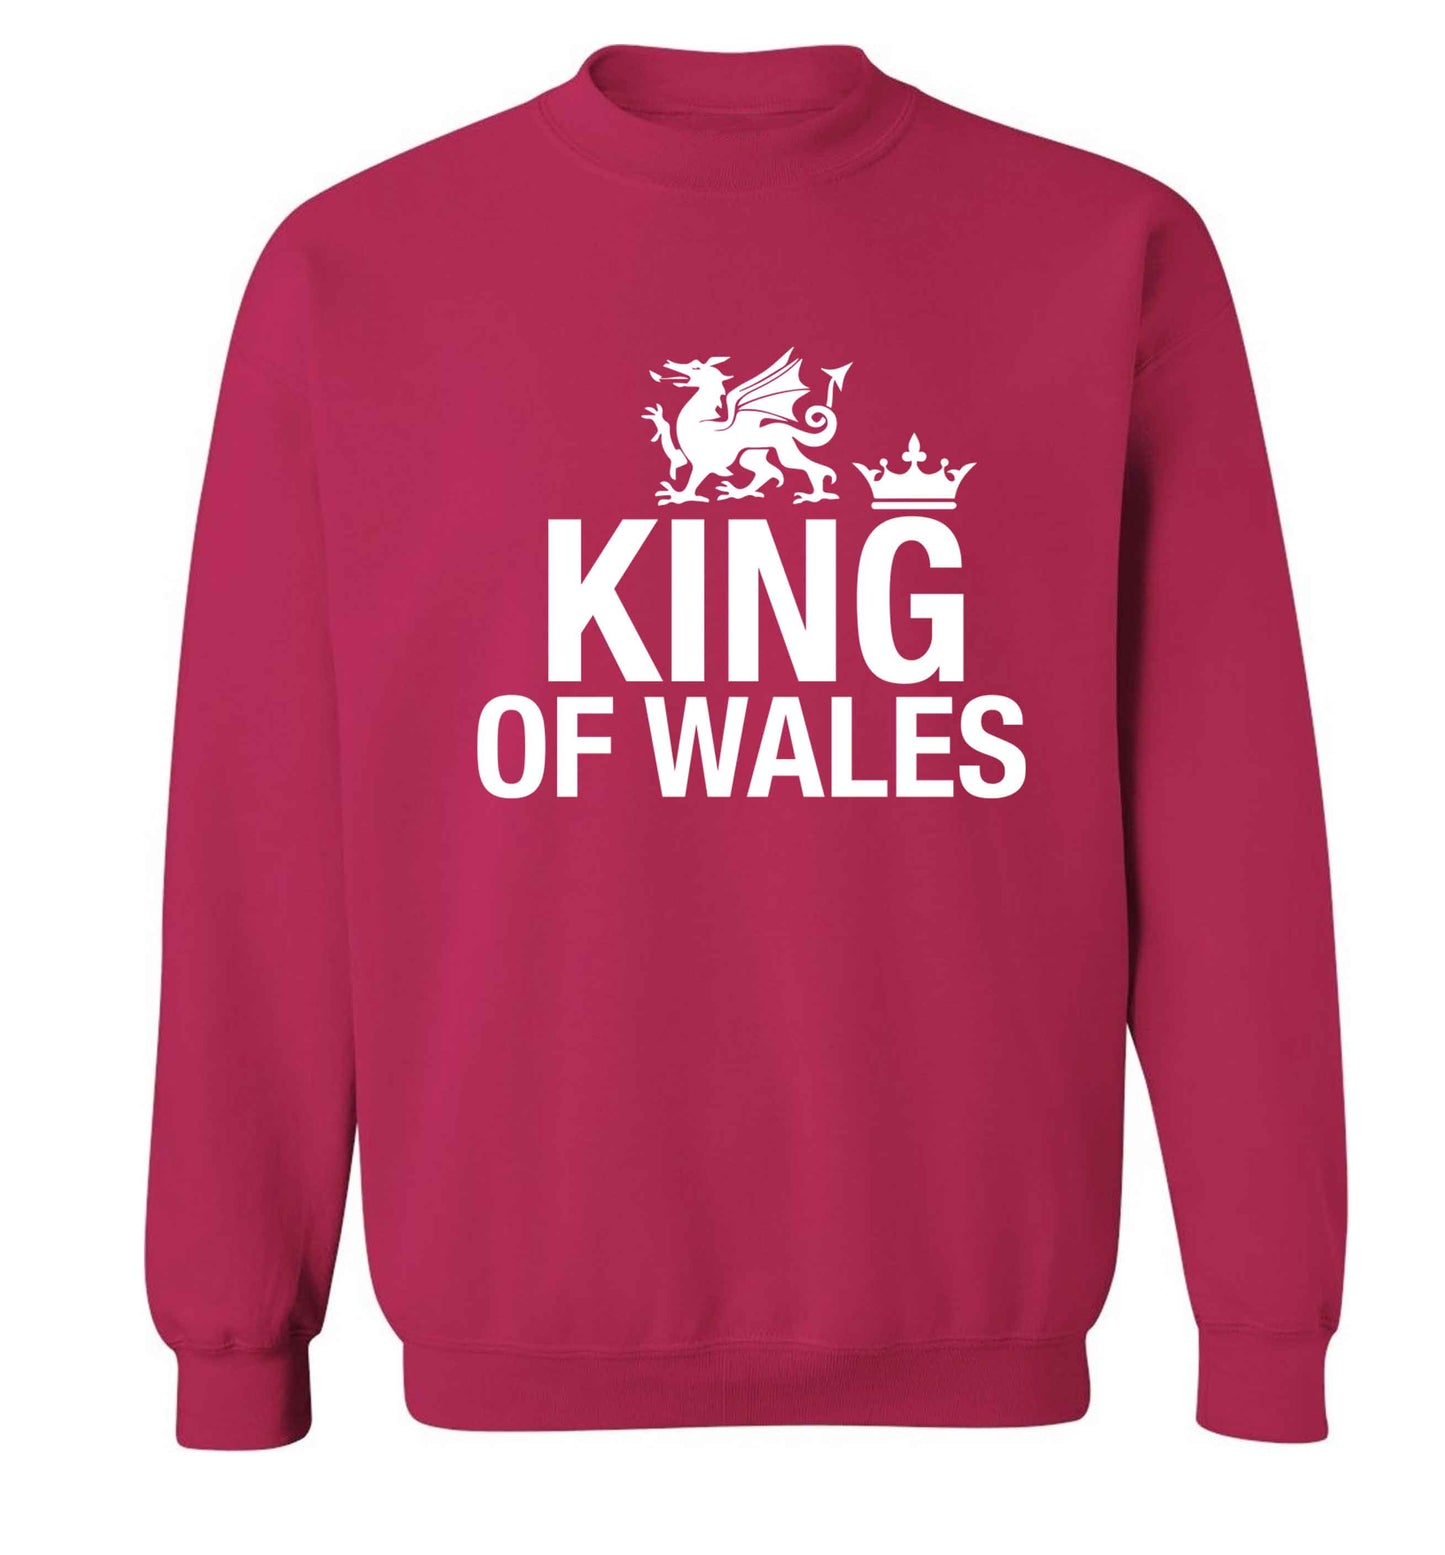 King of Wales Adult's unisex pink Sweater 2XL